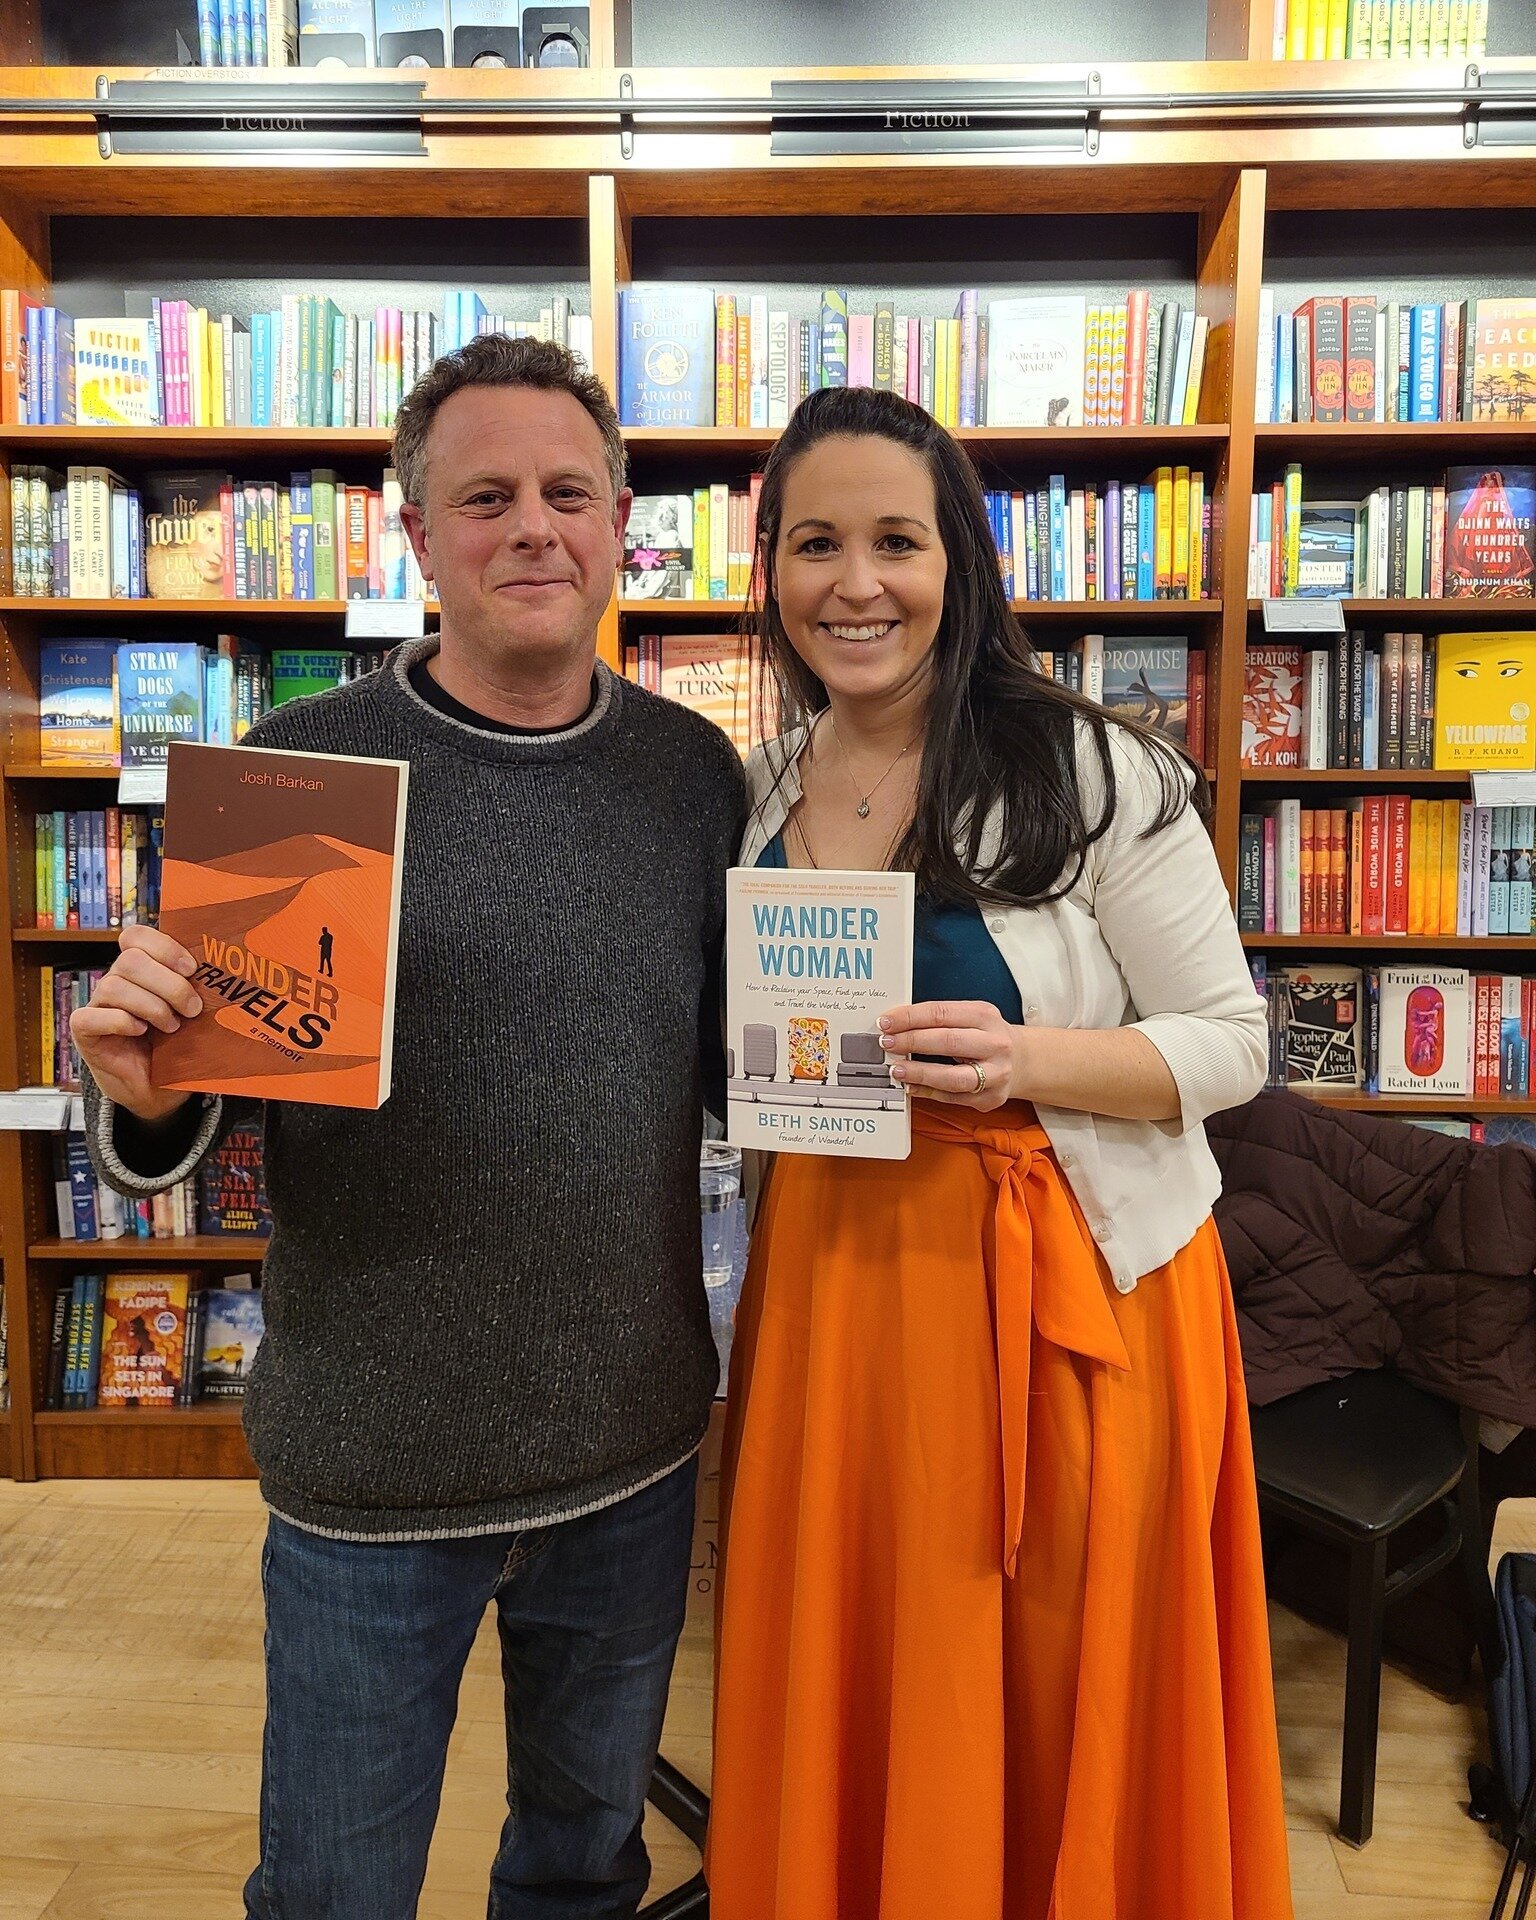 Oh hey, book tour!

First stop on the #WanderWoman book tour was the amazing mom-and-pop-owned @belmontbooks in Belmont, MA.

It was my first book reading ever, styled as a fireside chat about some of the key topics in the book, like:

-The discrepan